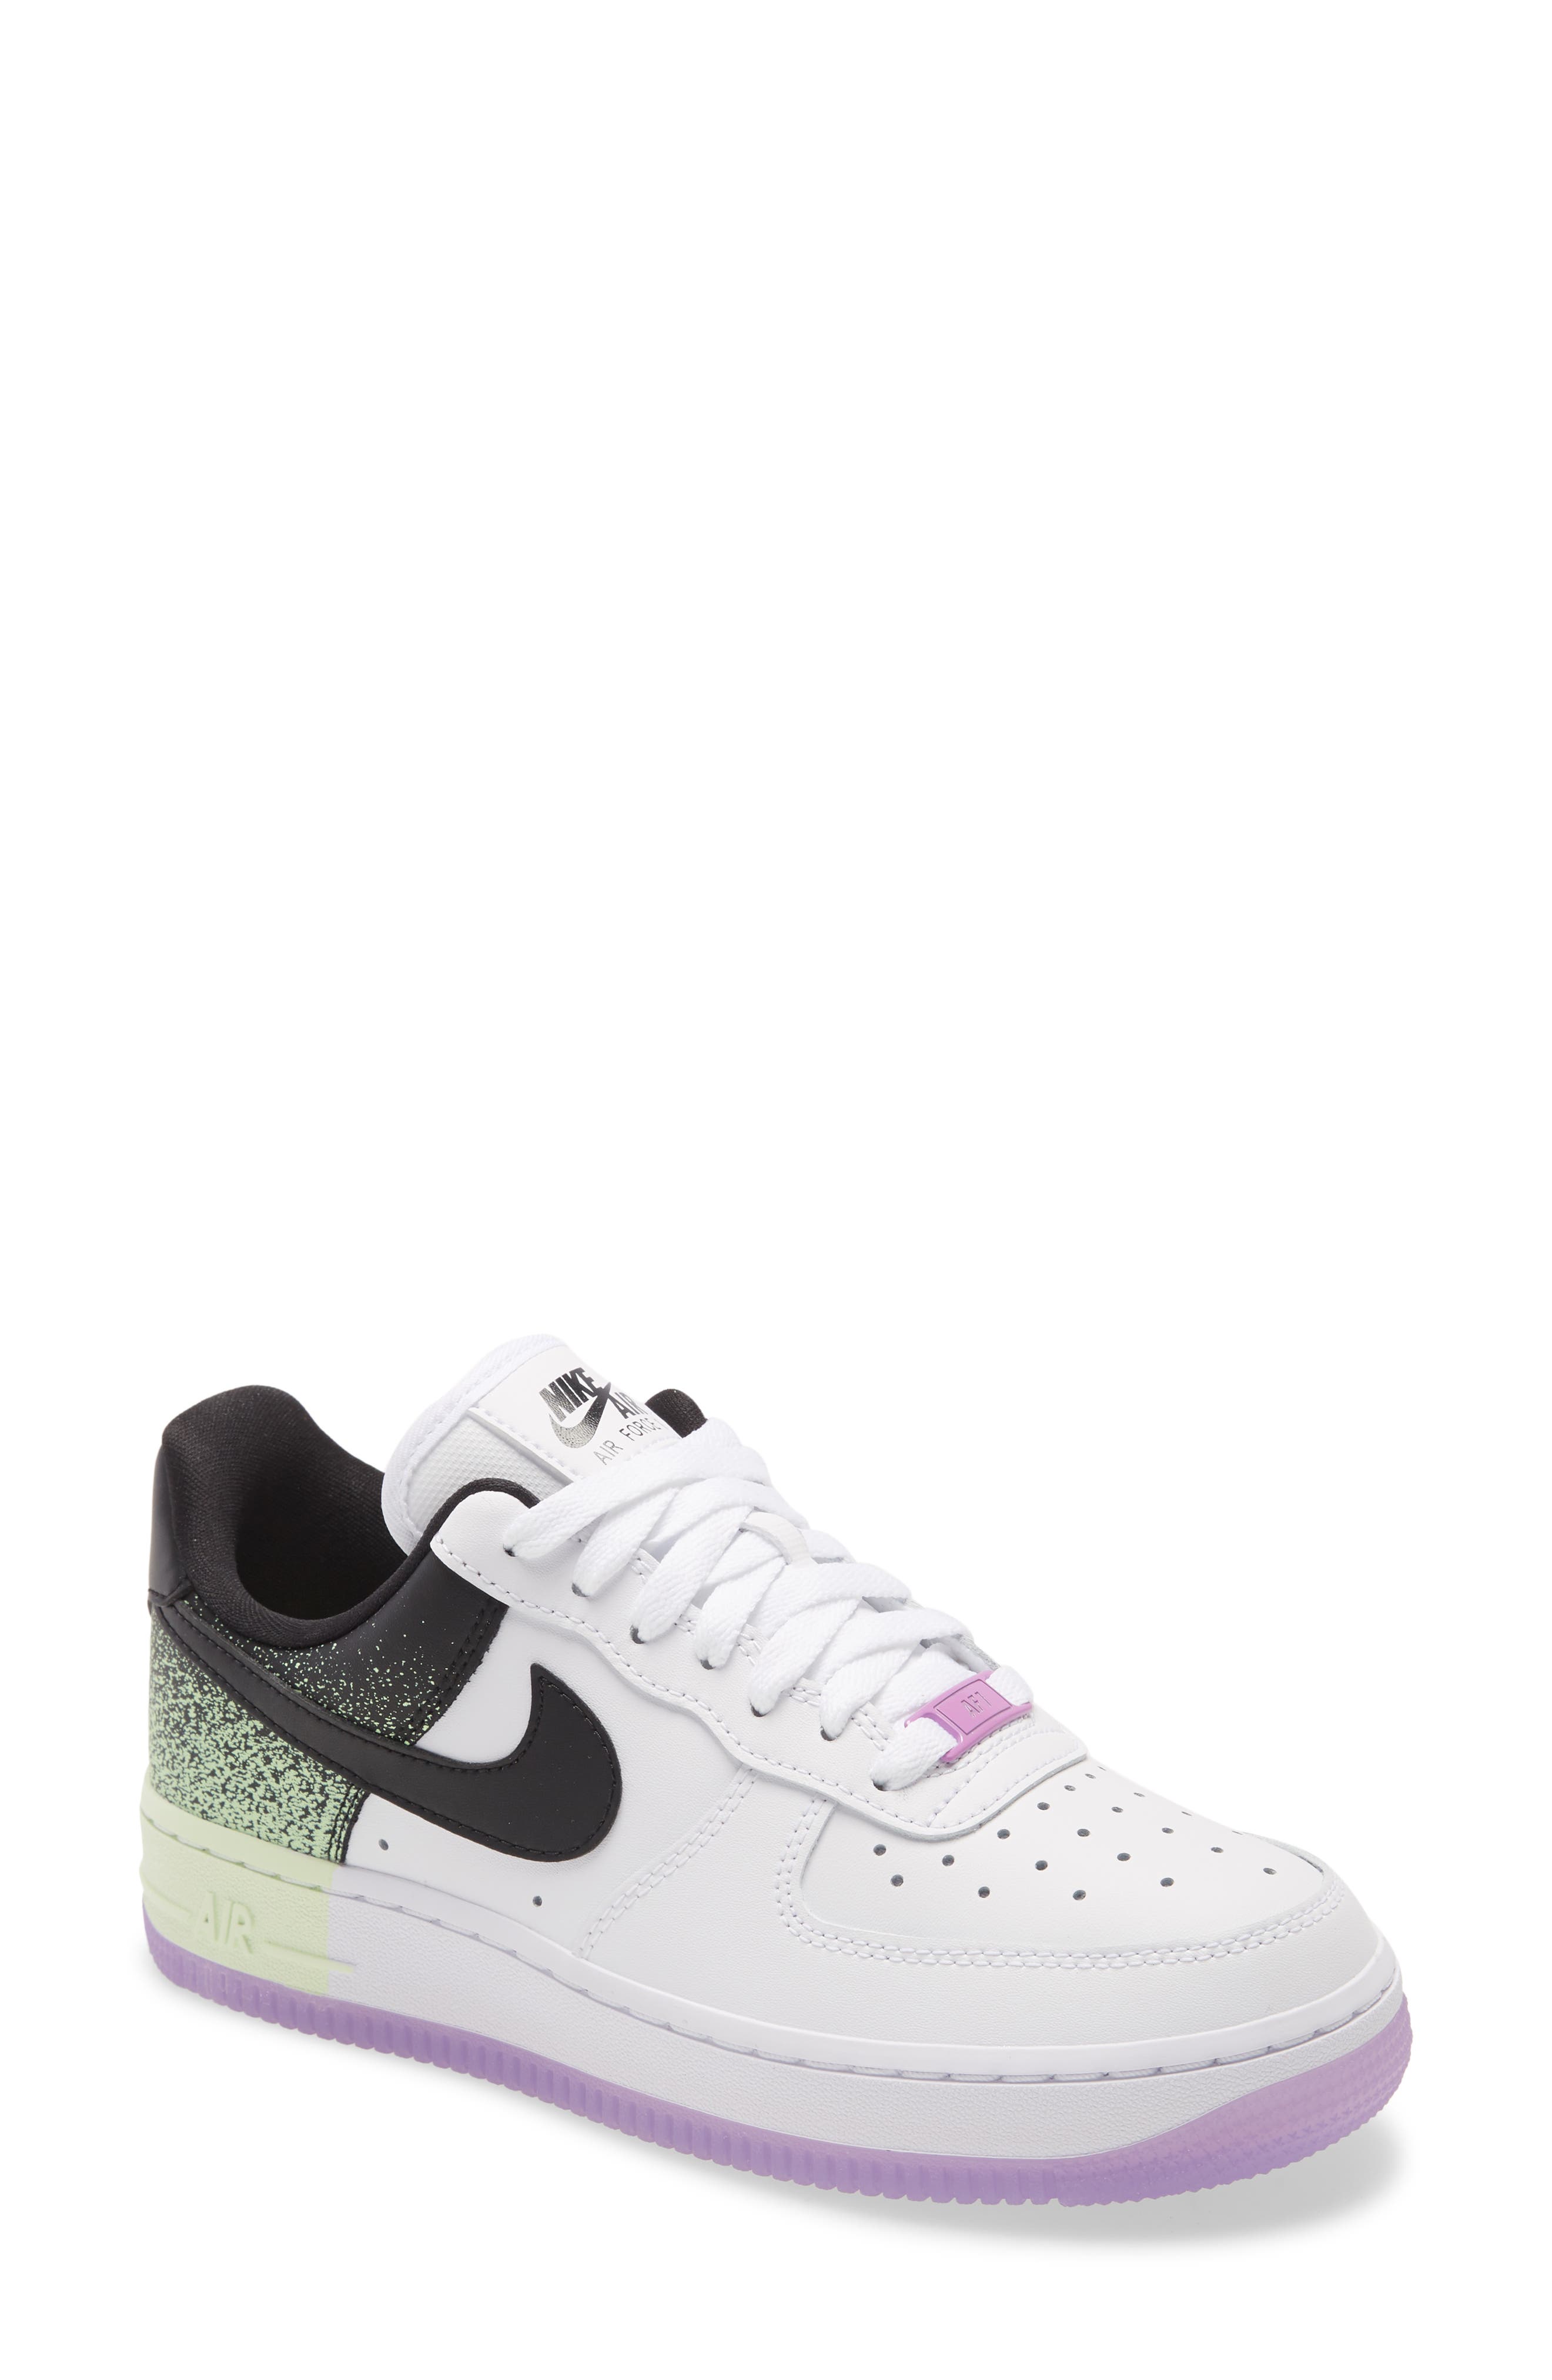 womens nike air force 1 nordstrom